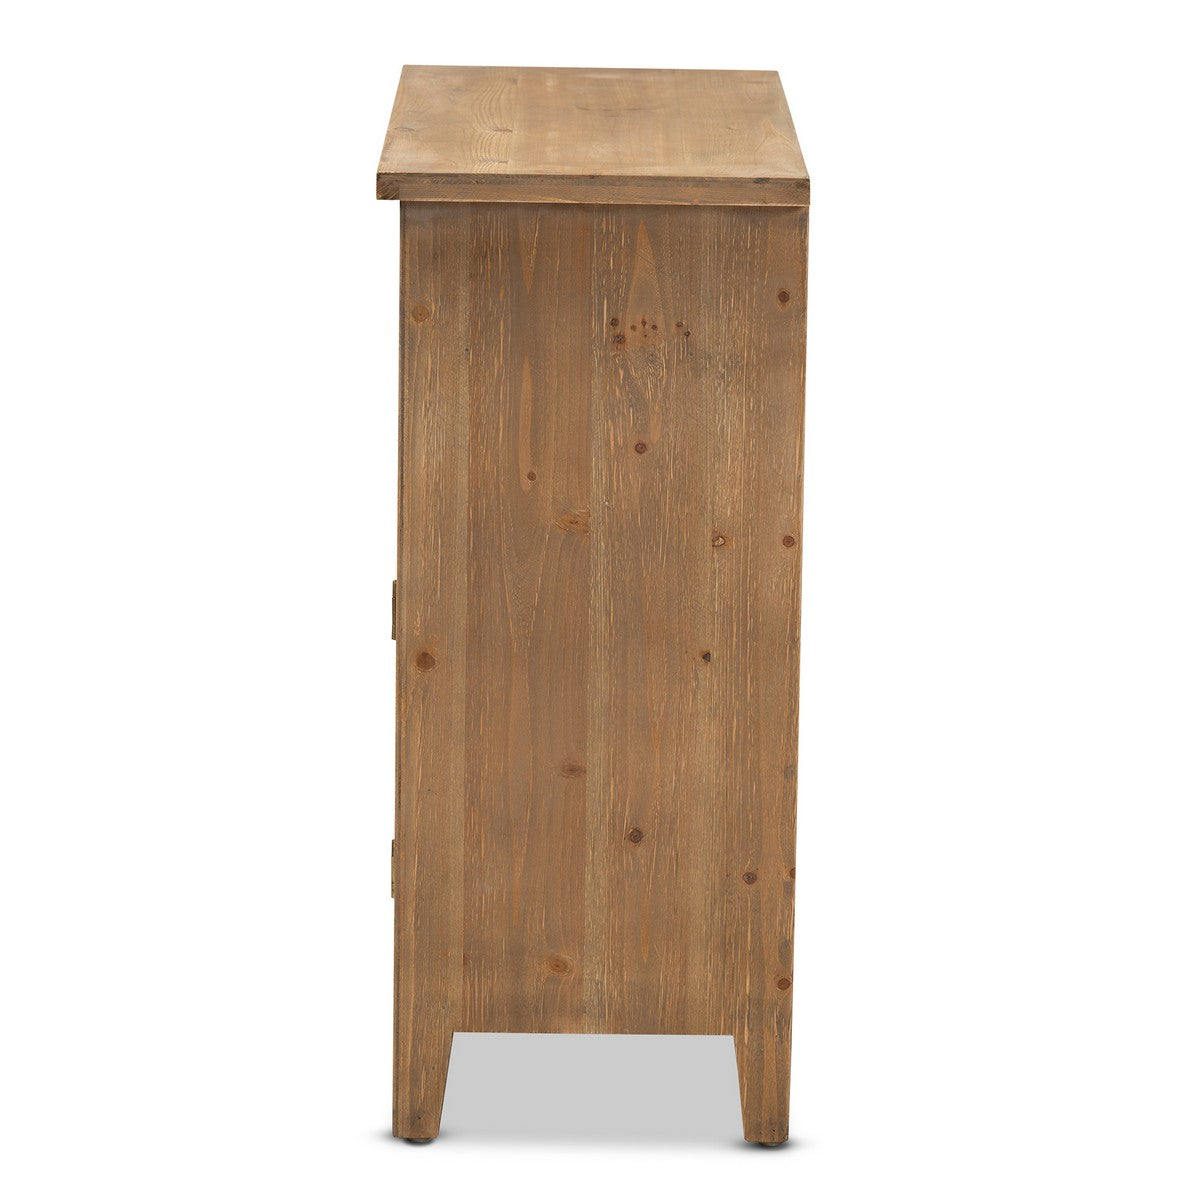 Baxton Studio Clement Rustic Transitional Medium Oak Finished 2-Door and 2-Drawer Wood Spindle Accent Storage Cabinet